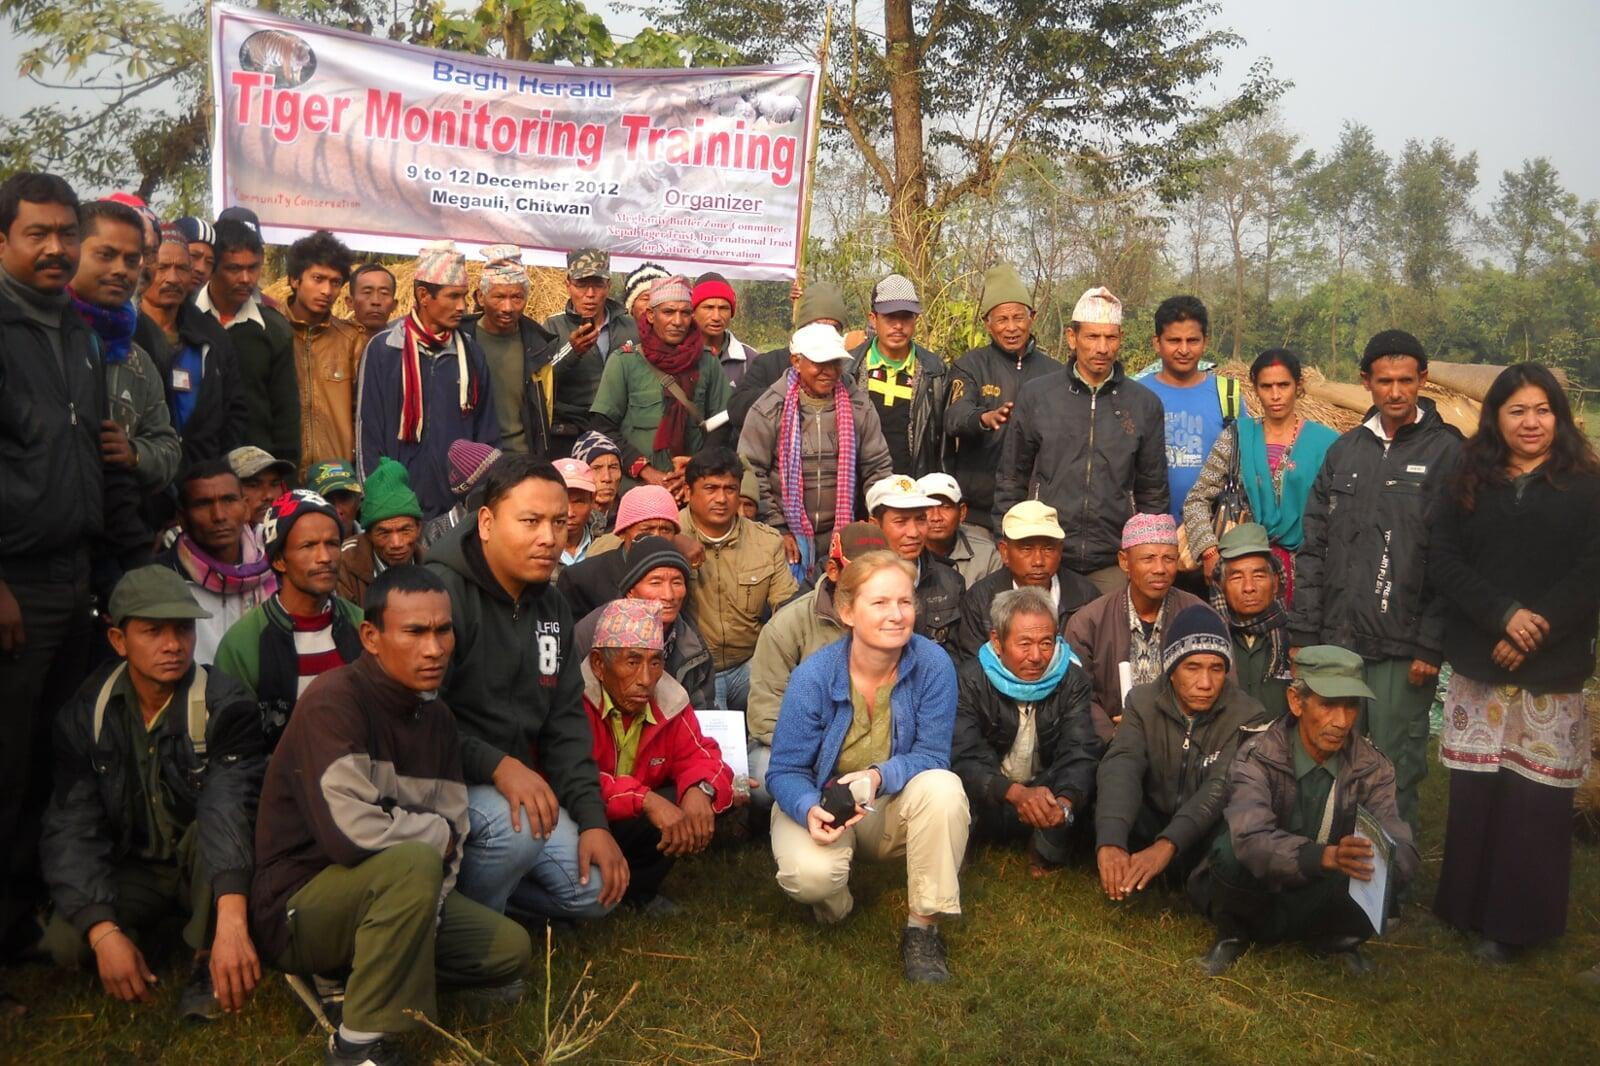 Group photo of participants in the Tiger Monitoring Training in Meghauli